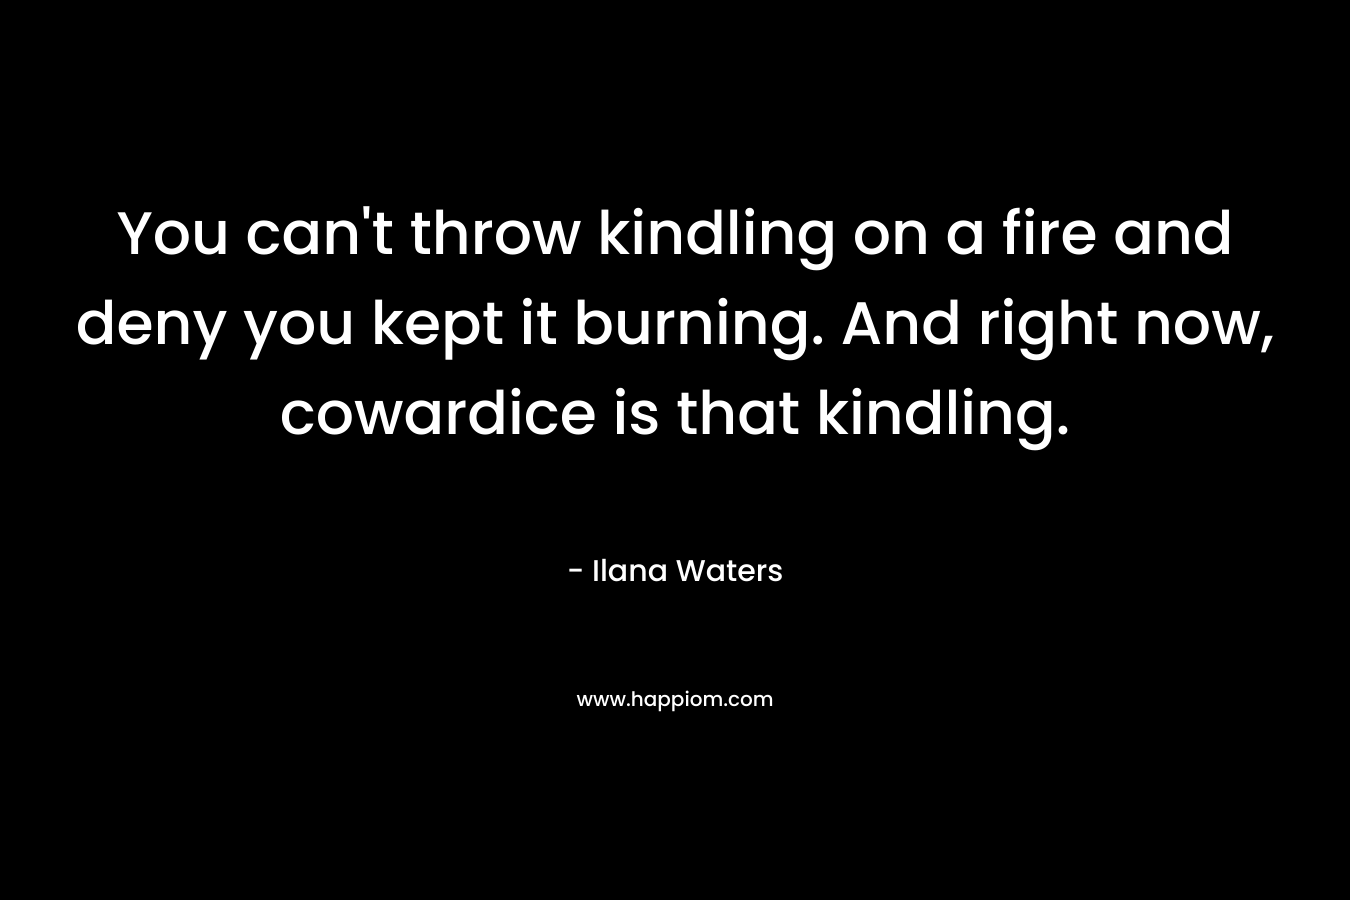 You can't throw kindling on a fire and deny you kept it burning. And right now, cowardice is that kindling.